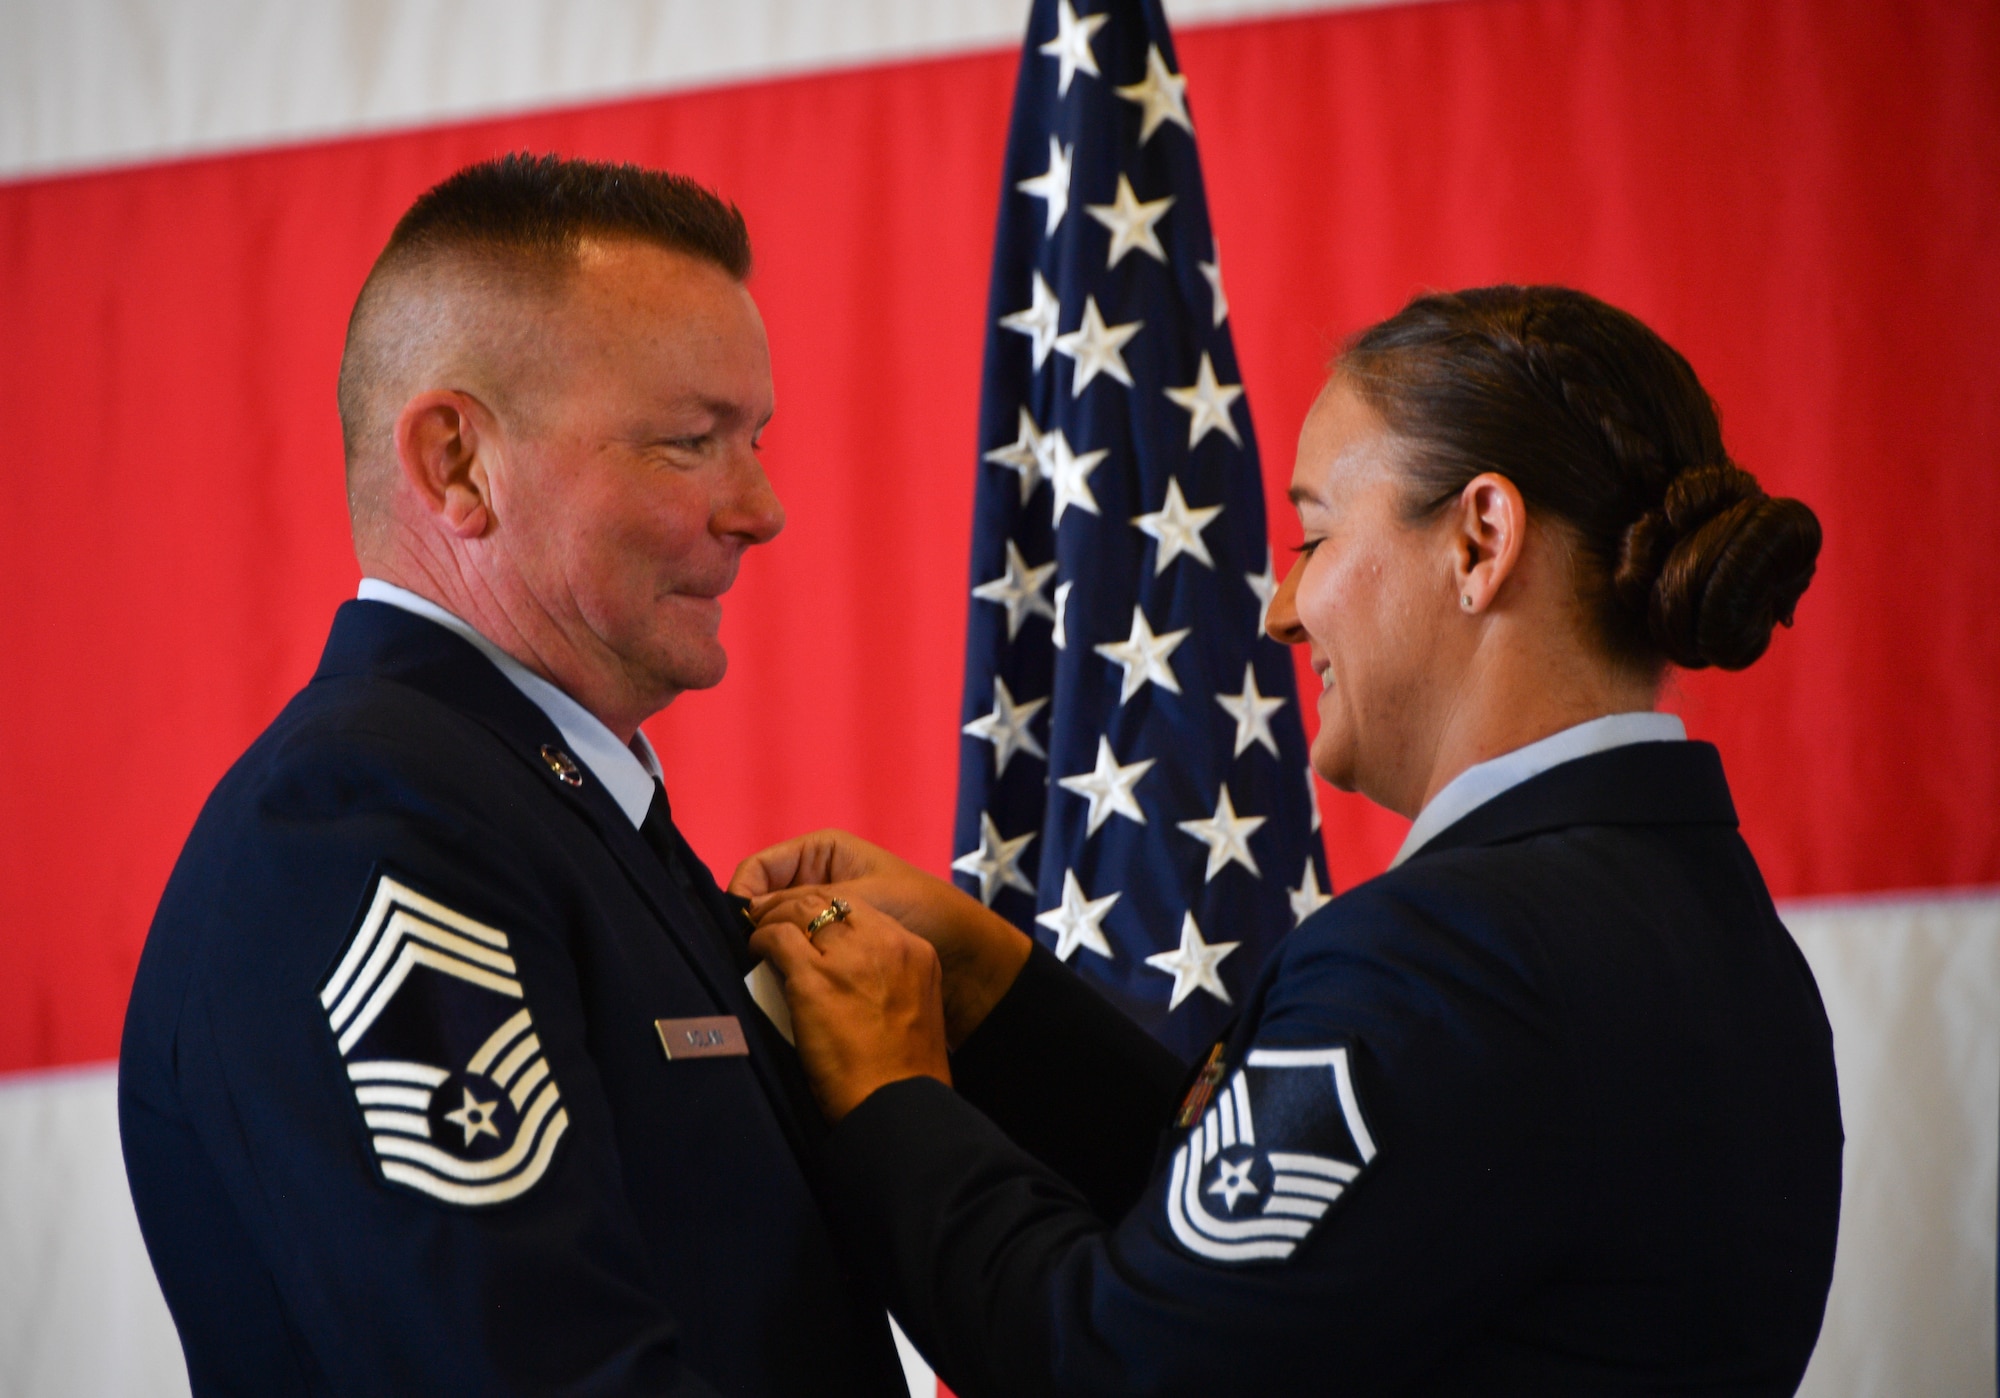 Master Sgt. Renee Mclain affixes Chief Master Sgt. James Mclain’s retirement pin to his collar during his retirement ceremony at Naval Air Station Joint Reserve Base Fort Worth, Texas, June 4, 2022. Mclain  held numerous positions of responsibility at the 301st Fighter Wing since 2007 and ended his career as the 301st Maintenance Squadron superintendent.(U.S. Air Force photo by Staff Sgt. Nije Hightower)